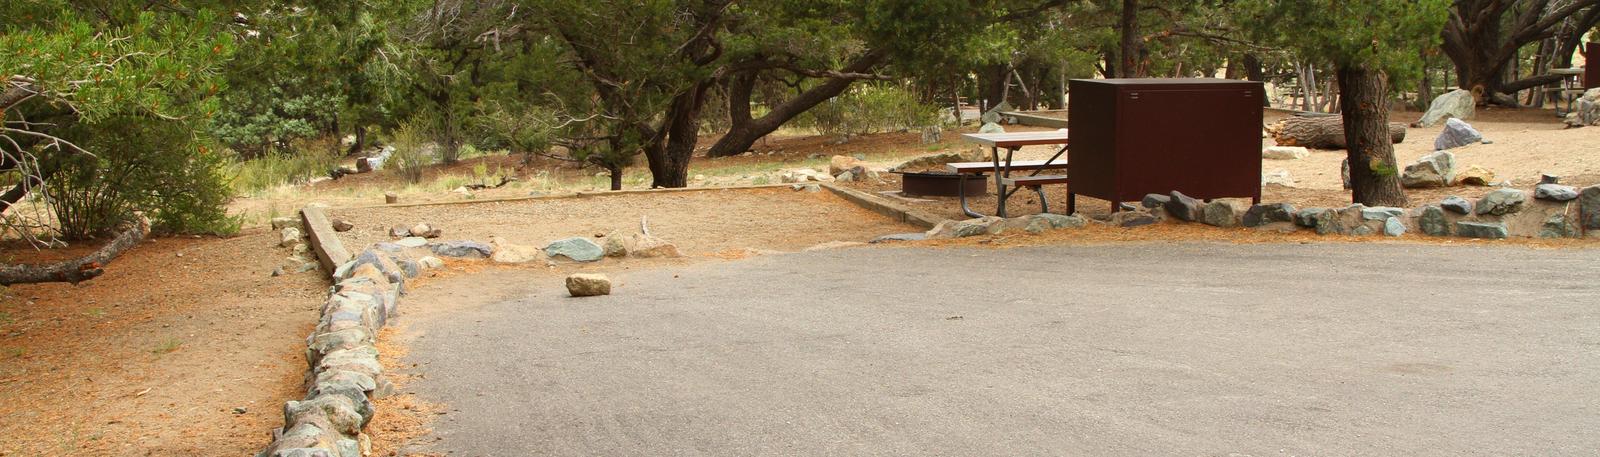 Wide view of Site #11 parking and designated tent pad, with bear box, fire ring and picnic table.Site #11, Pinon Flats Campground